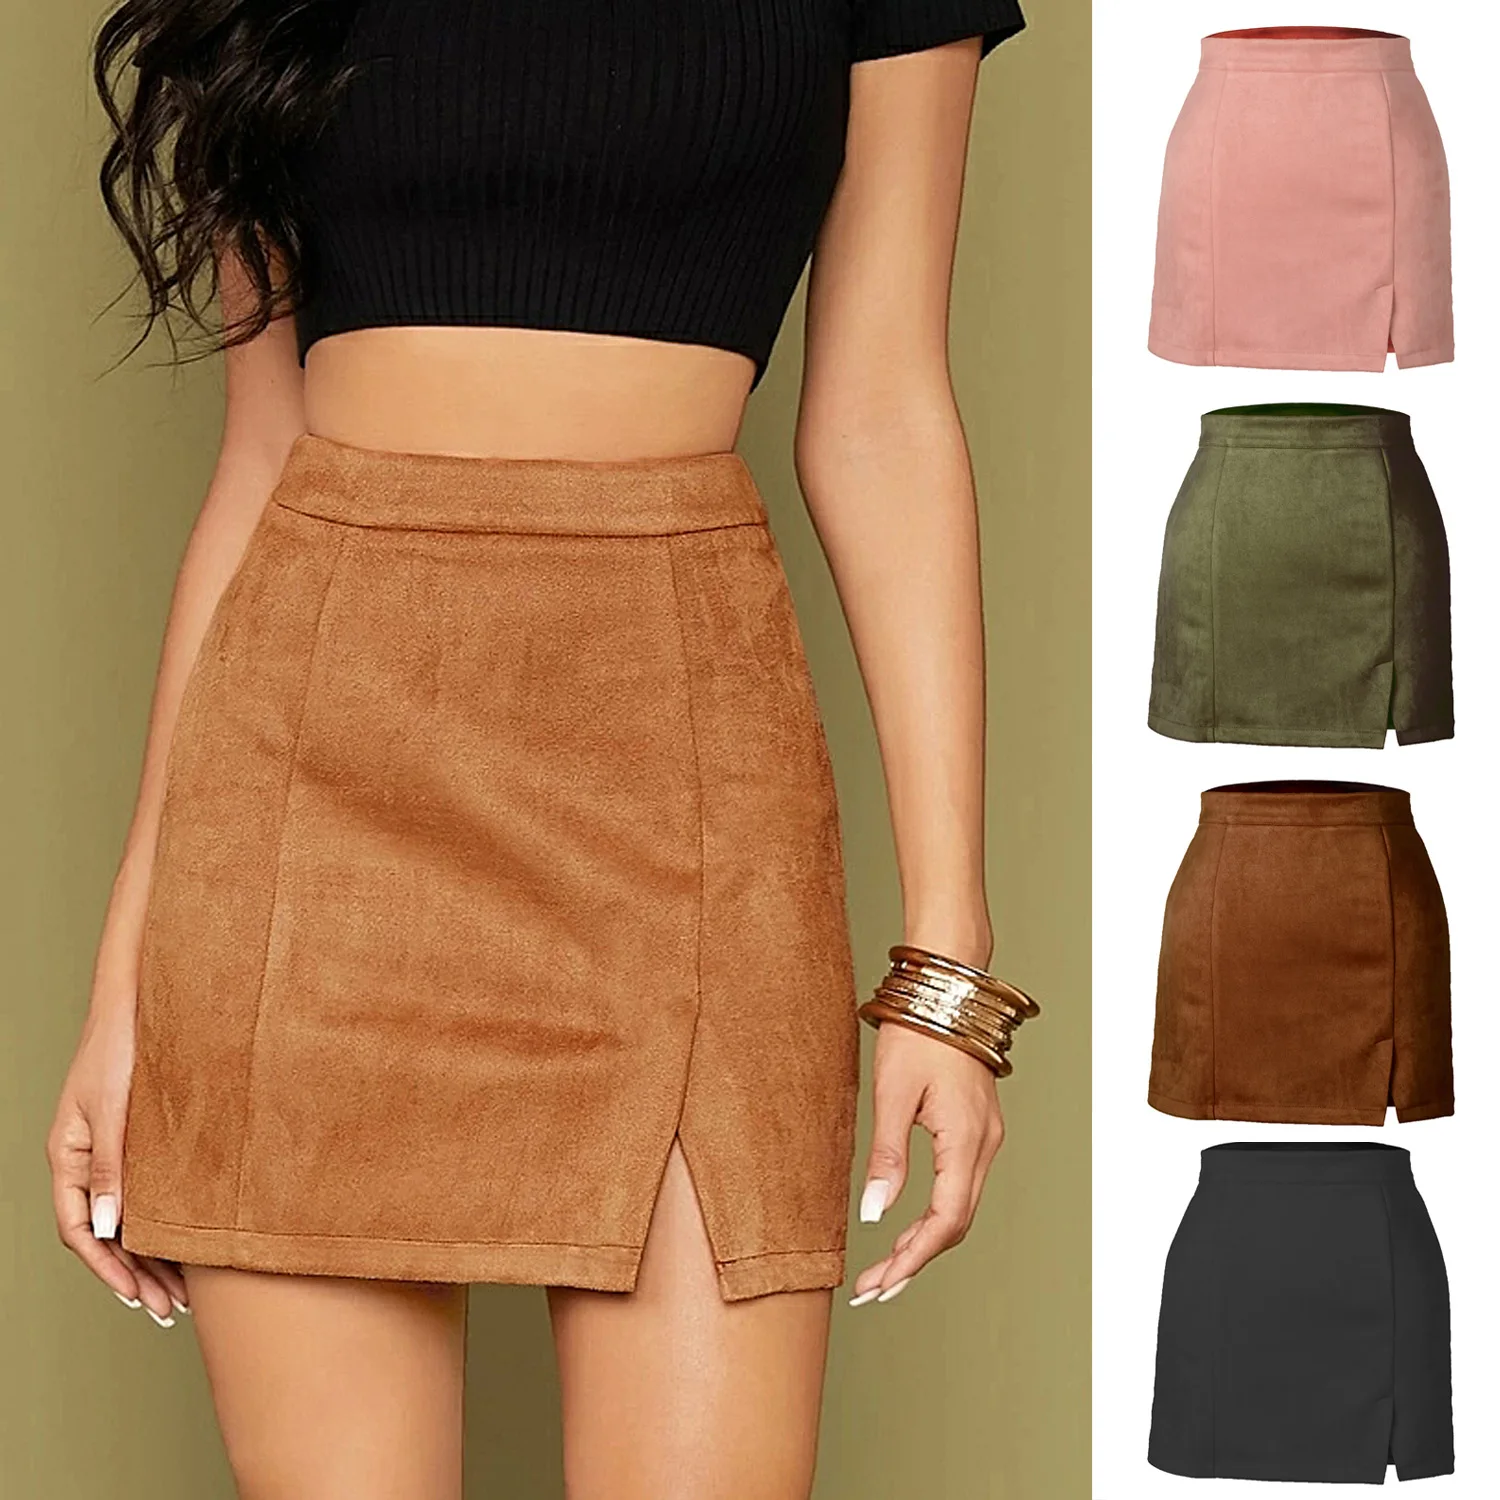 

Autumn Winter Women's Suede Bag Hip Skirt High Waist Skirts with Zipper A-line Solid Colors Jupe Taille Haute Female Sexy Mini